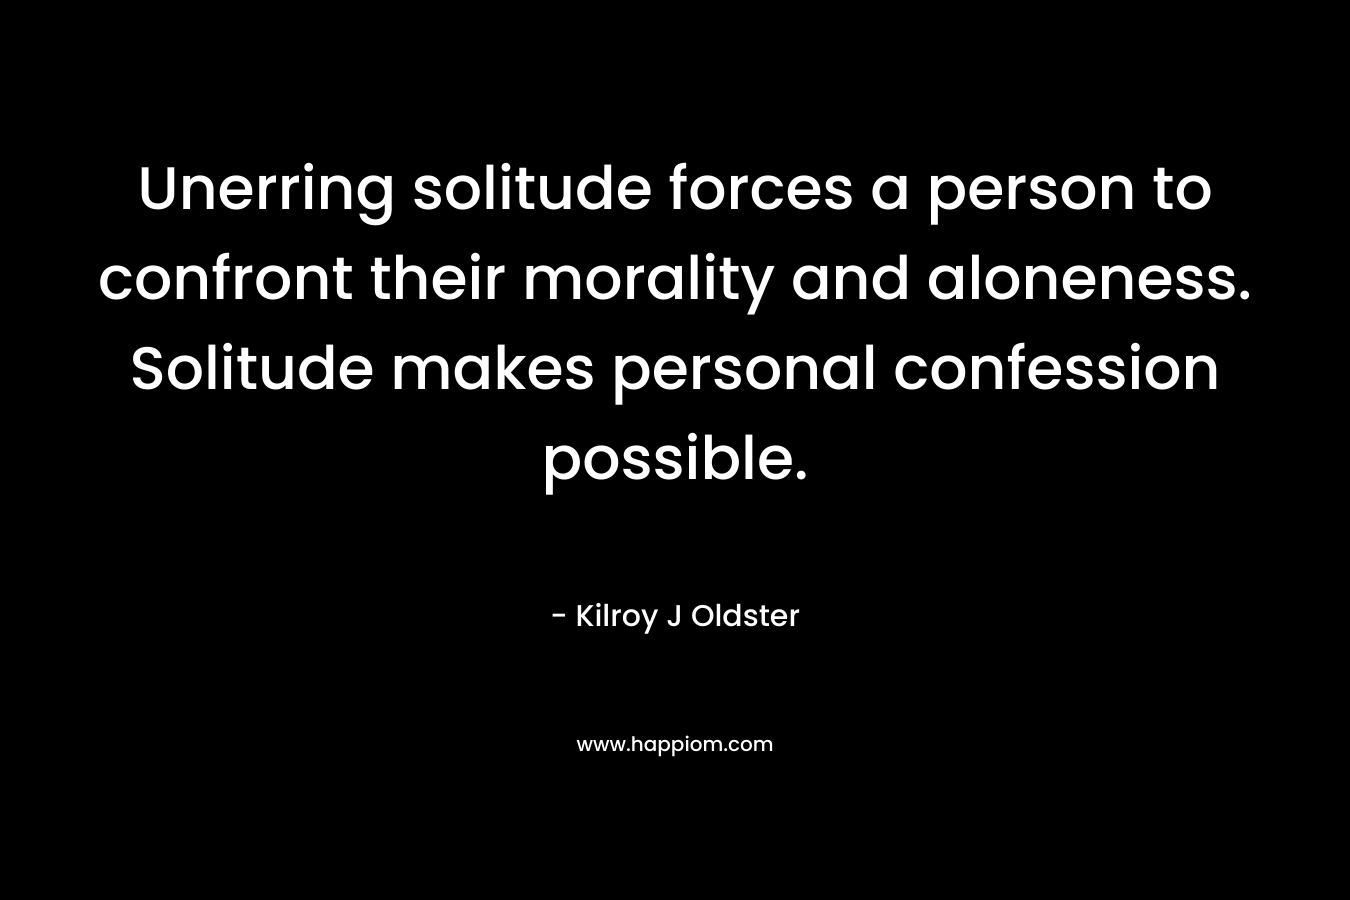 Unerring solitude forces a person to confront their morality and aloneness. Solitude makes personal confession possible. – Kilroy J Oldster